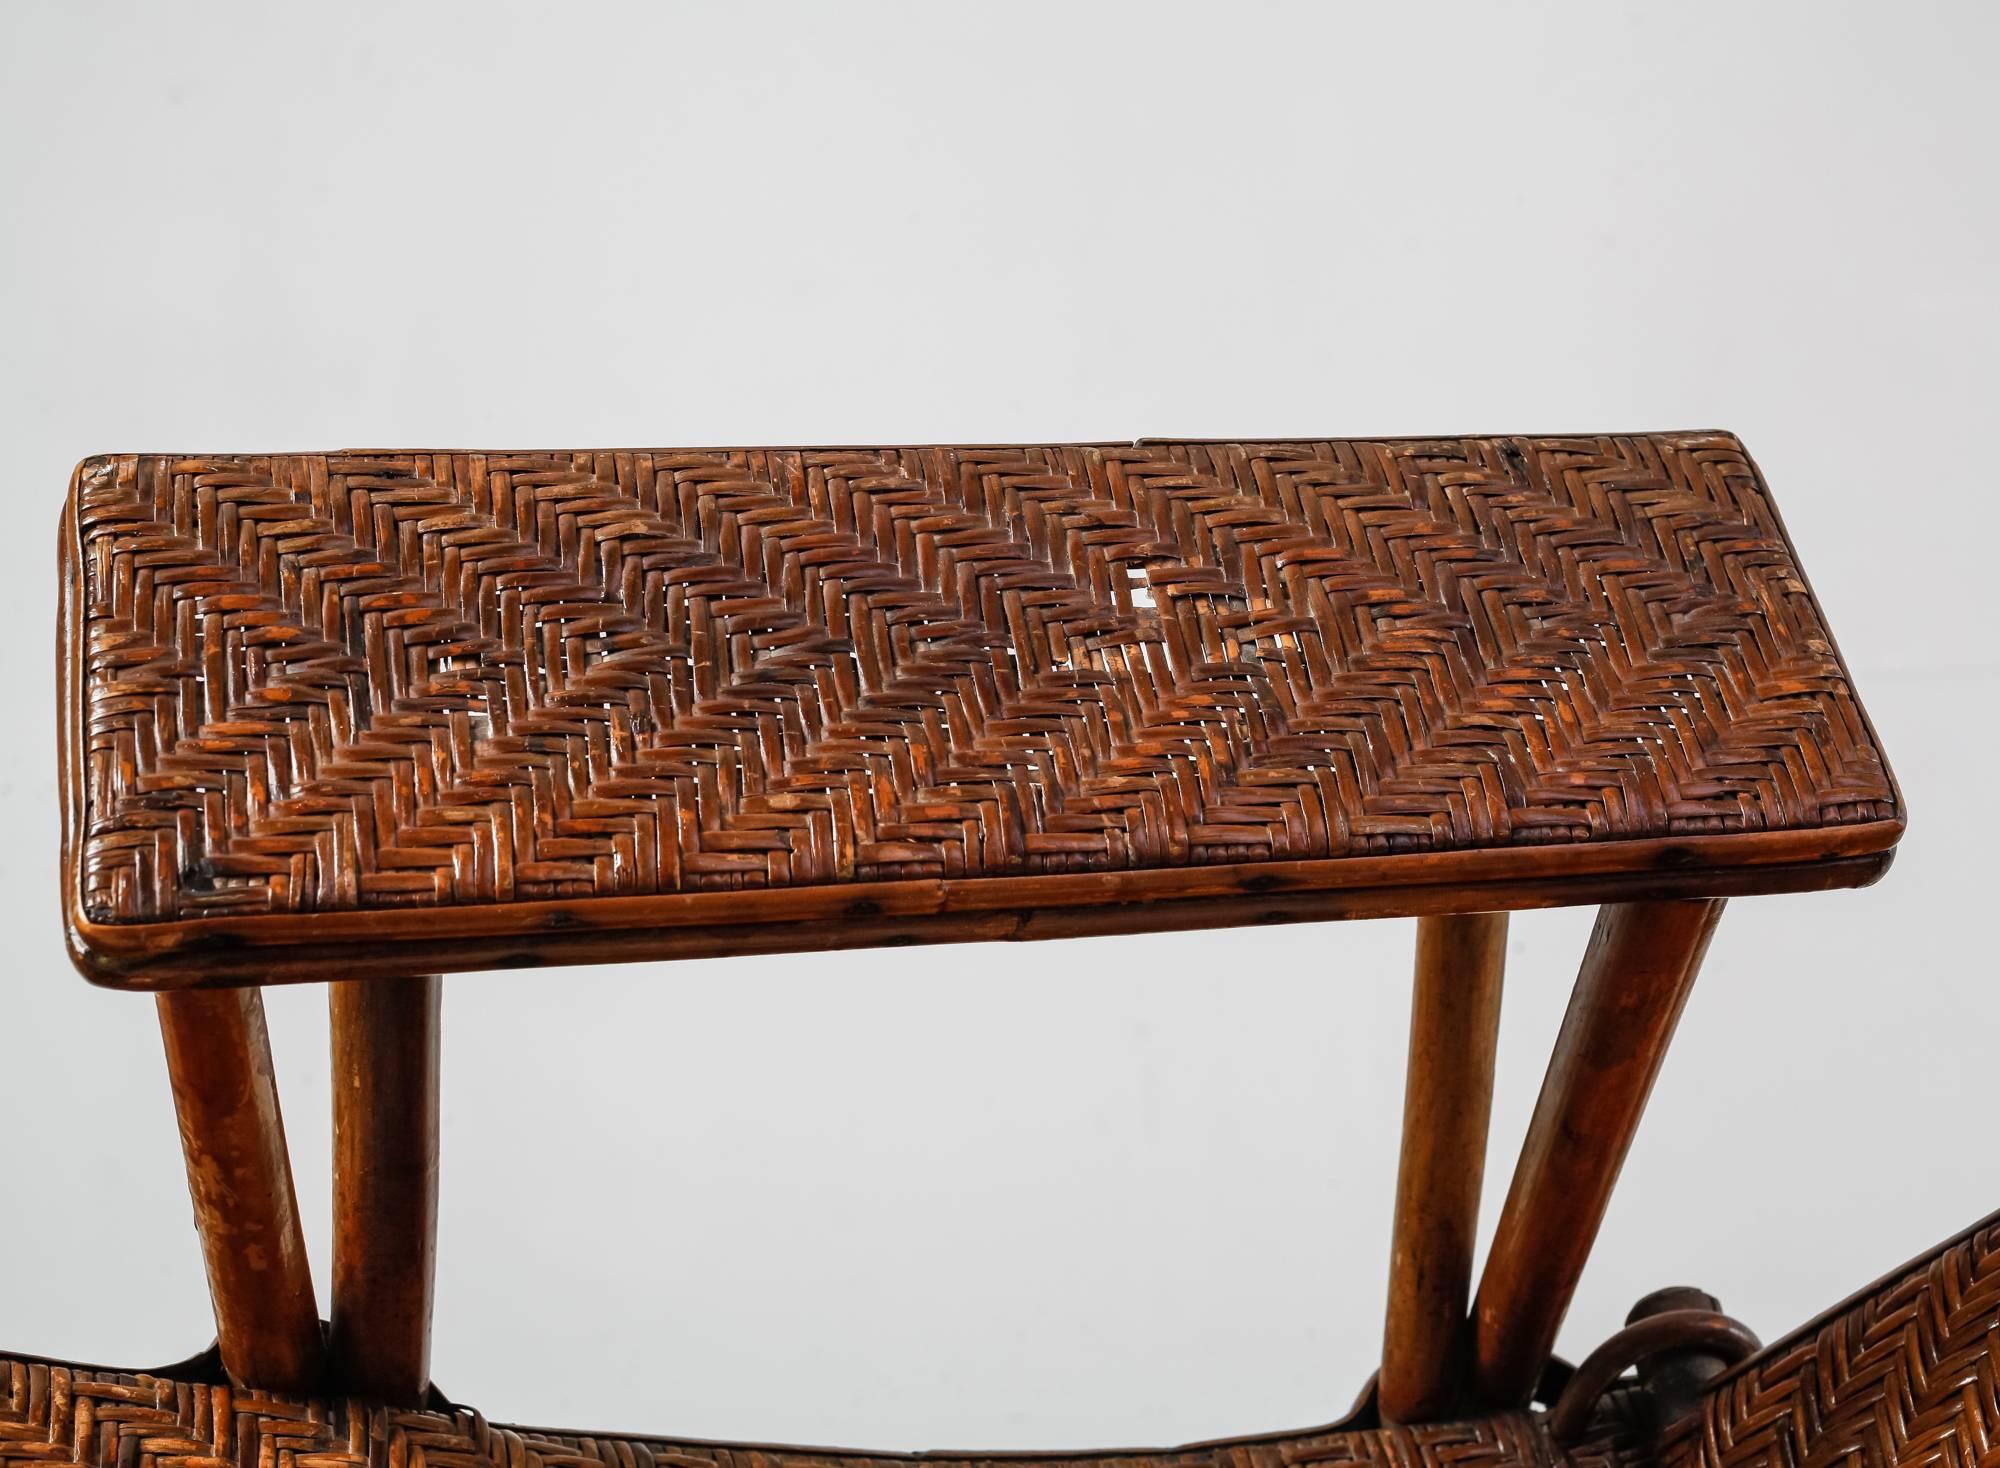 Adjustable Bamboo and Rattan Garden Chaise, Germany, 1920s-1930s For Sale 2